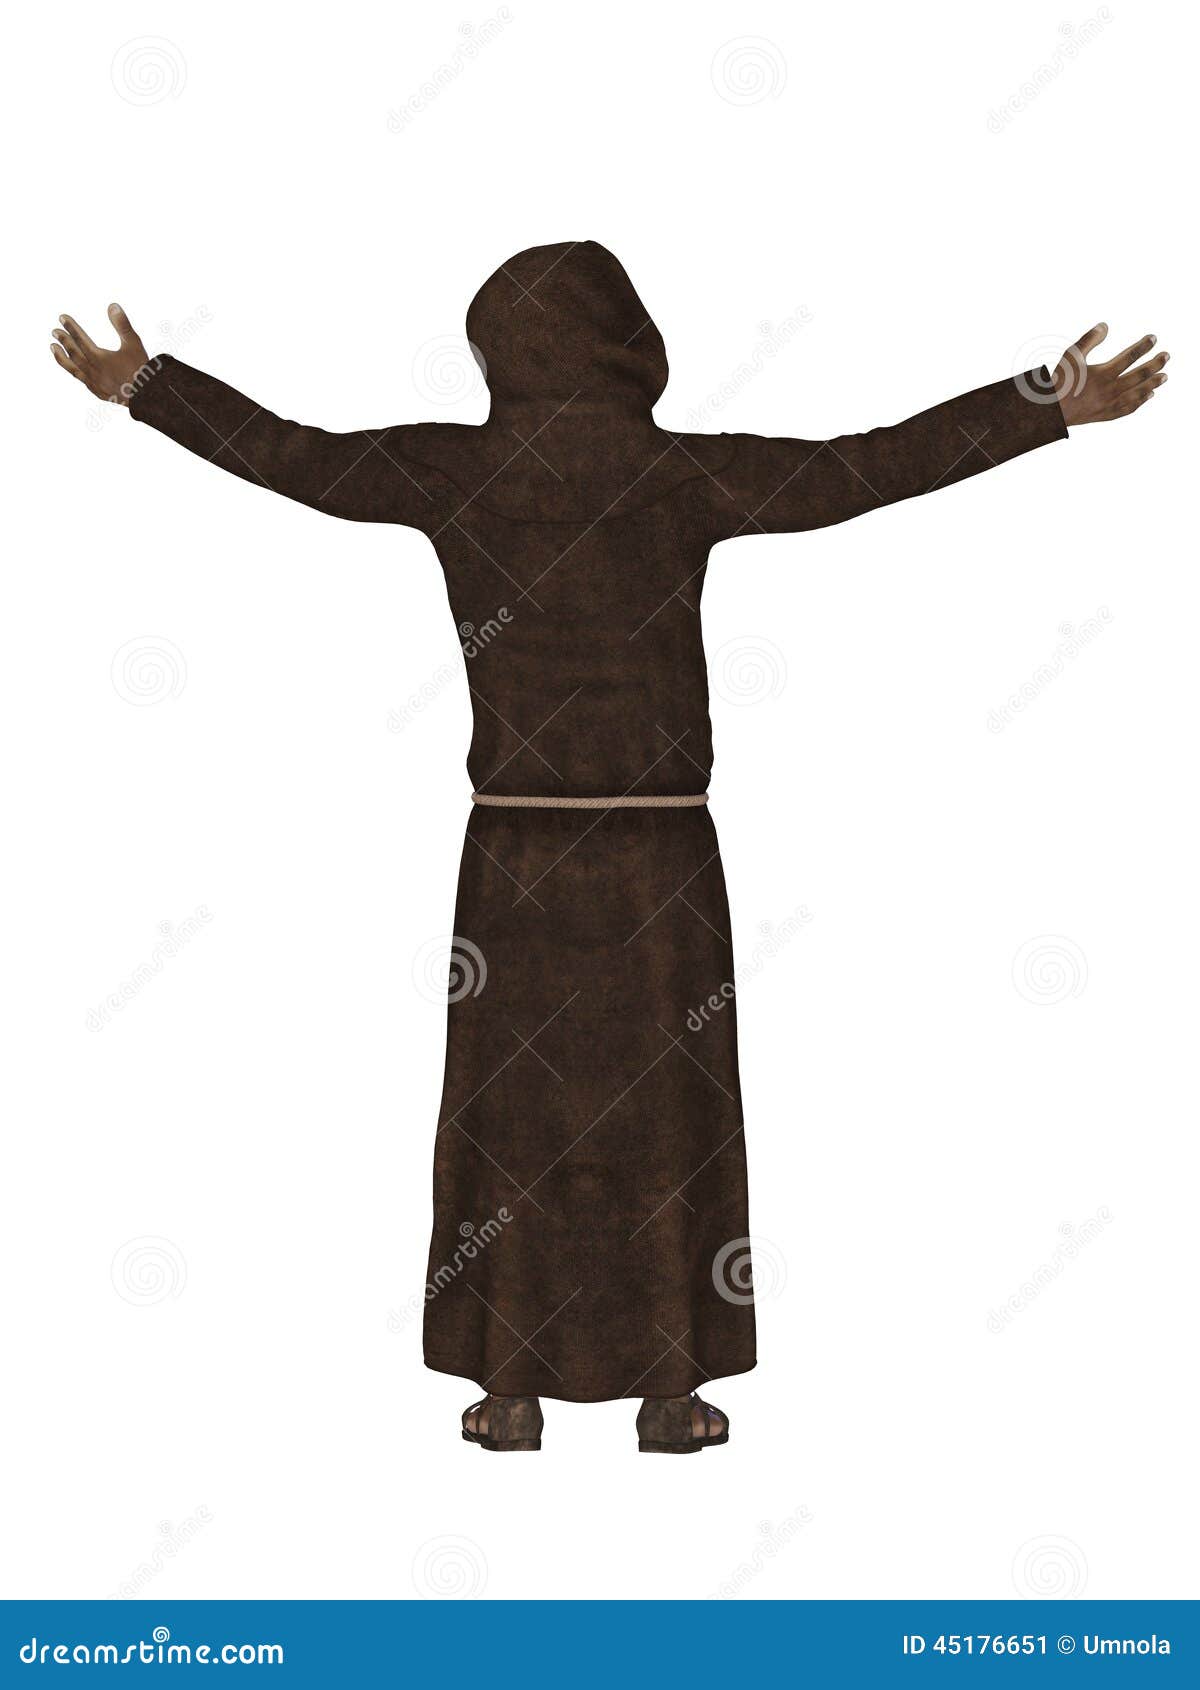 Christian monk, praying to God 3d. Isolated on the white background